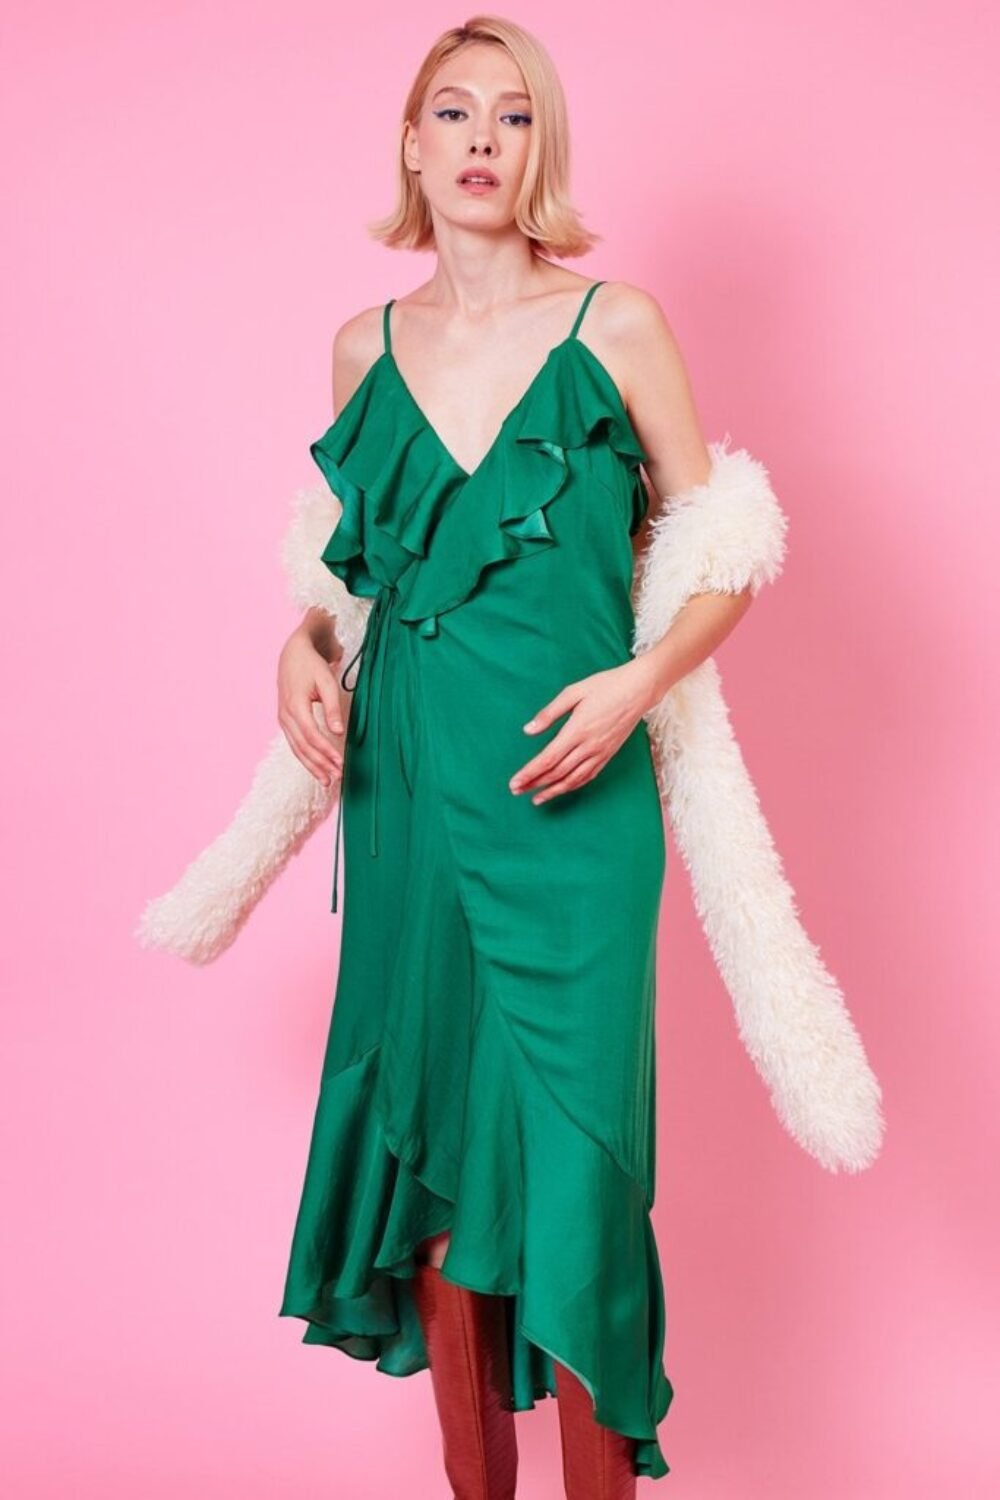 Shop Lux Emerald Silk Blend Maxi Ruffle Wrap Dress and women's luxury and designer clothes at www.lux-apparel.co.uk